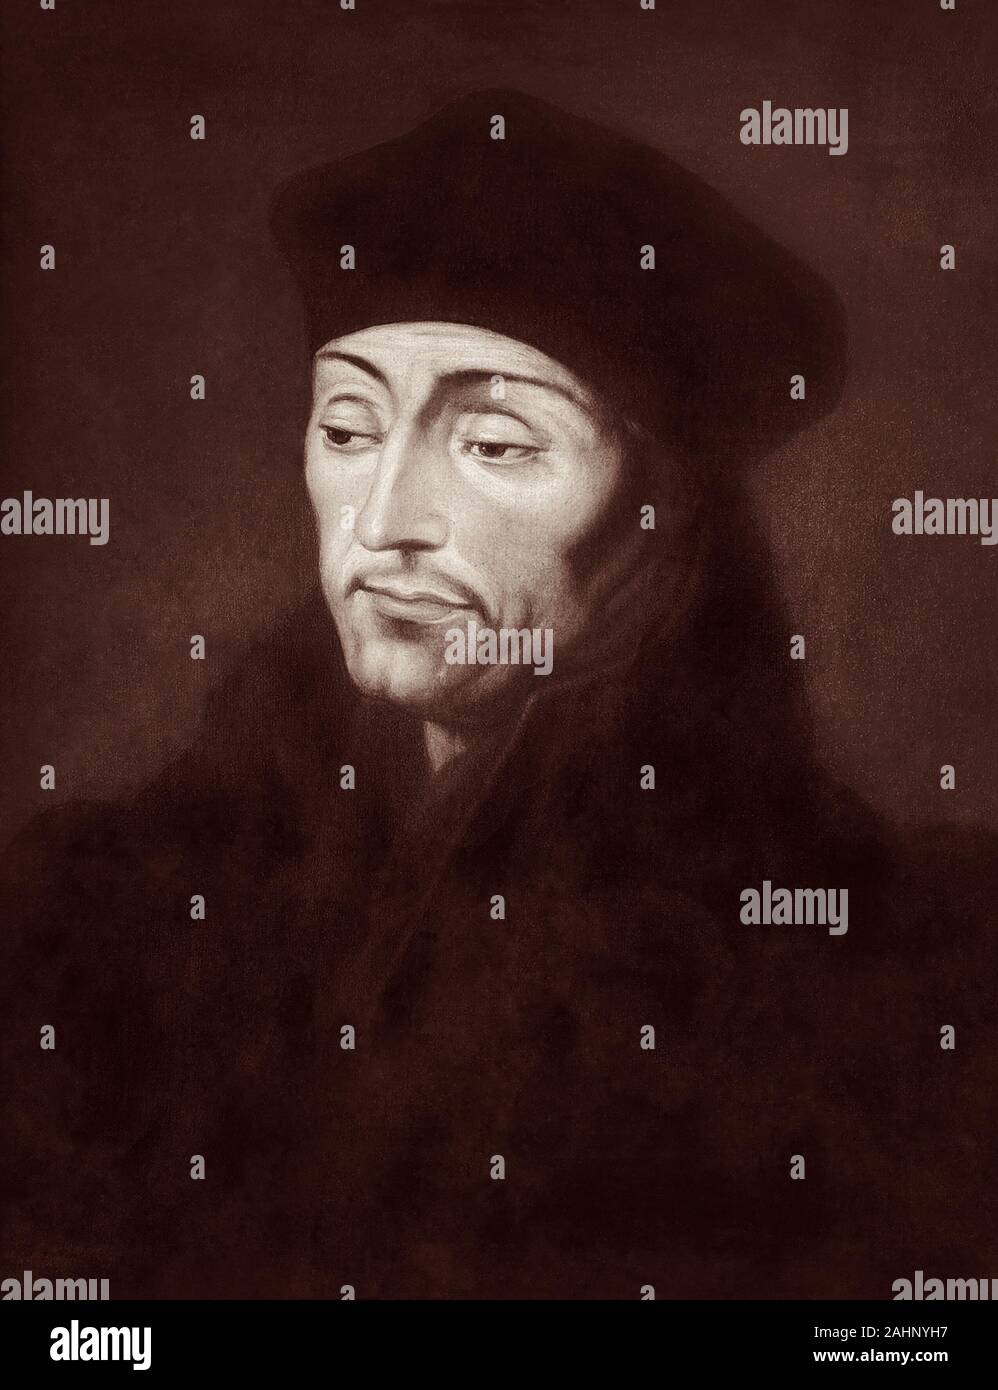 Desiderius Erasmus Roterodamus (1466-1536), usually referred to as Erasmus of Rotterdam or simply Erasmus, was a Dutch philosopher, Bible translator, and Christian humanist widely considered one of the greatest scholars of the northern Renaissance. Stock Photo